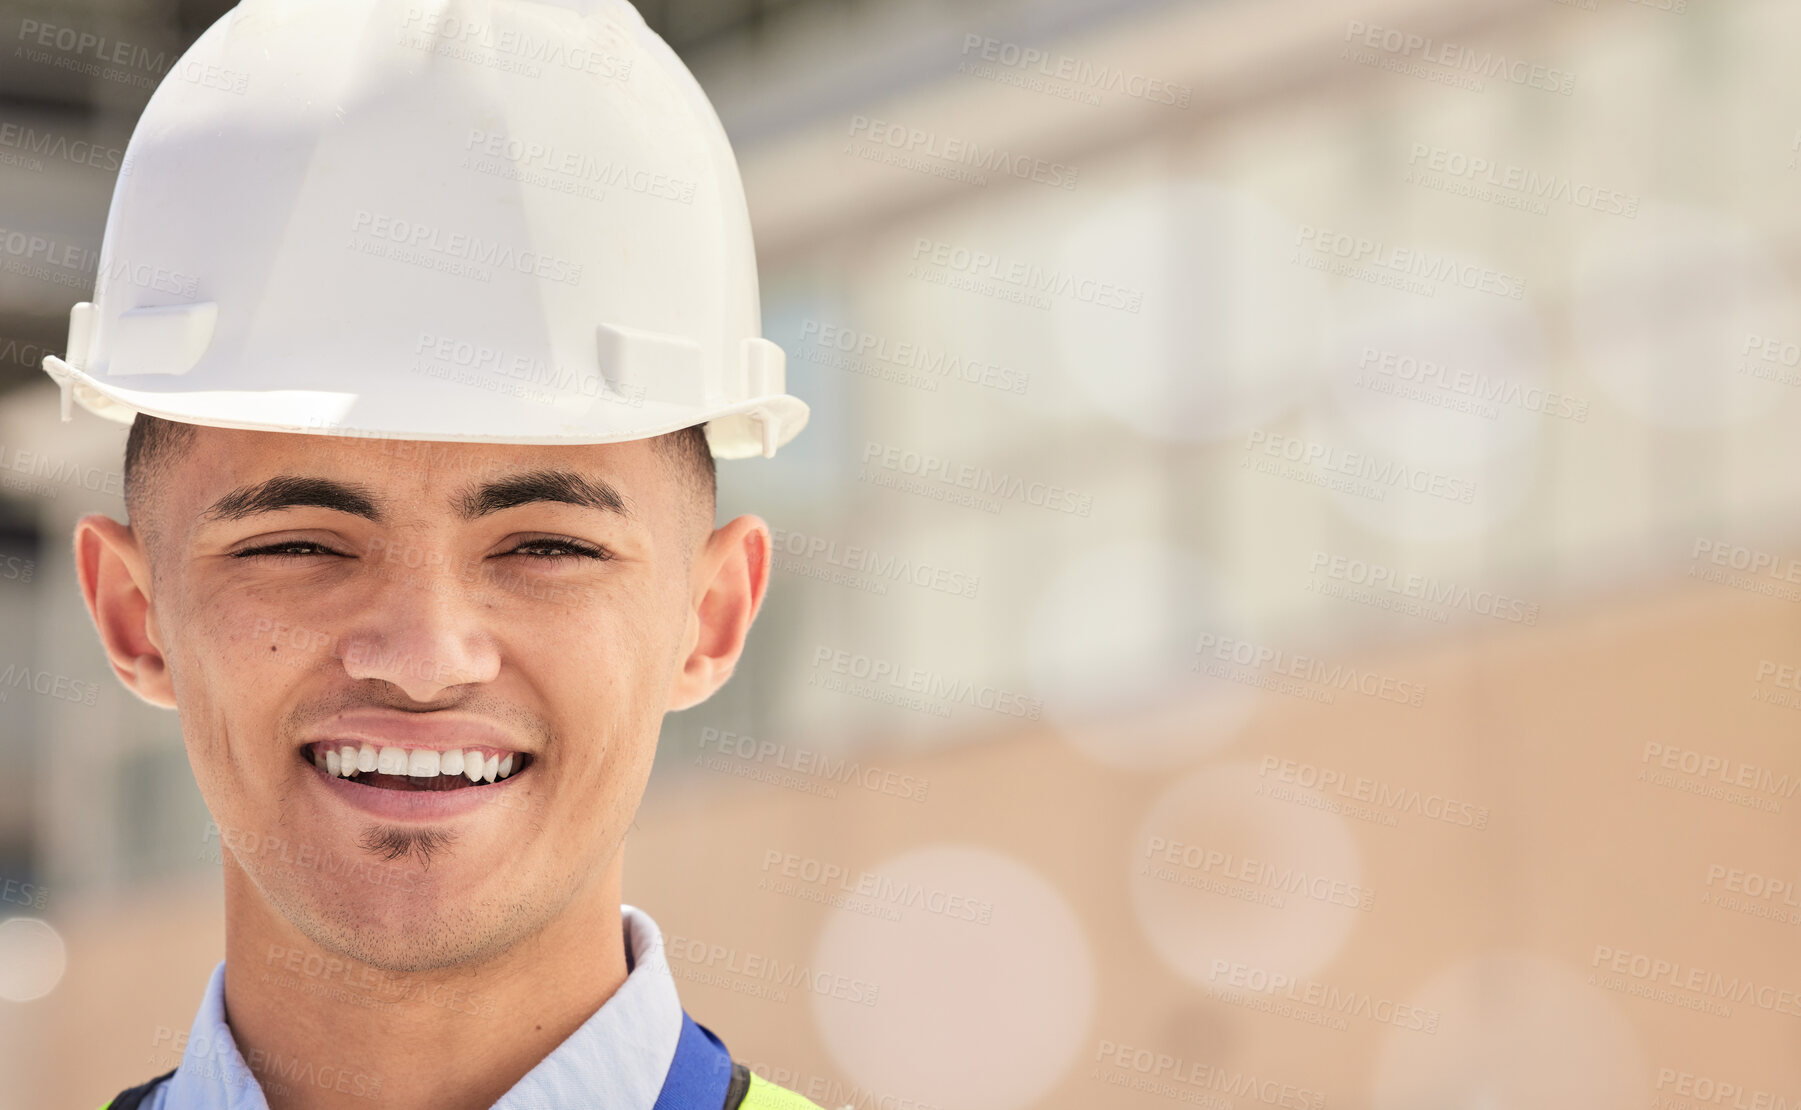 Buy stock photo Happy, man and portrait of construction inspection of building, site or industrial development with safety. Industry, worker and face of contractor and builder with happiness at warehouse or work